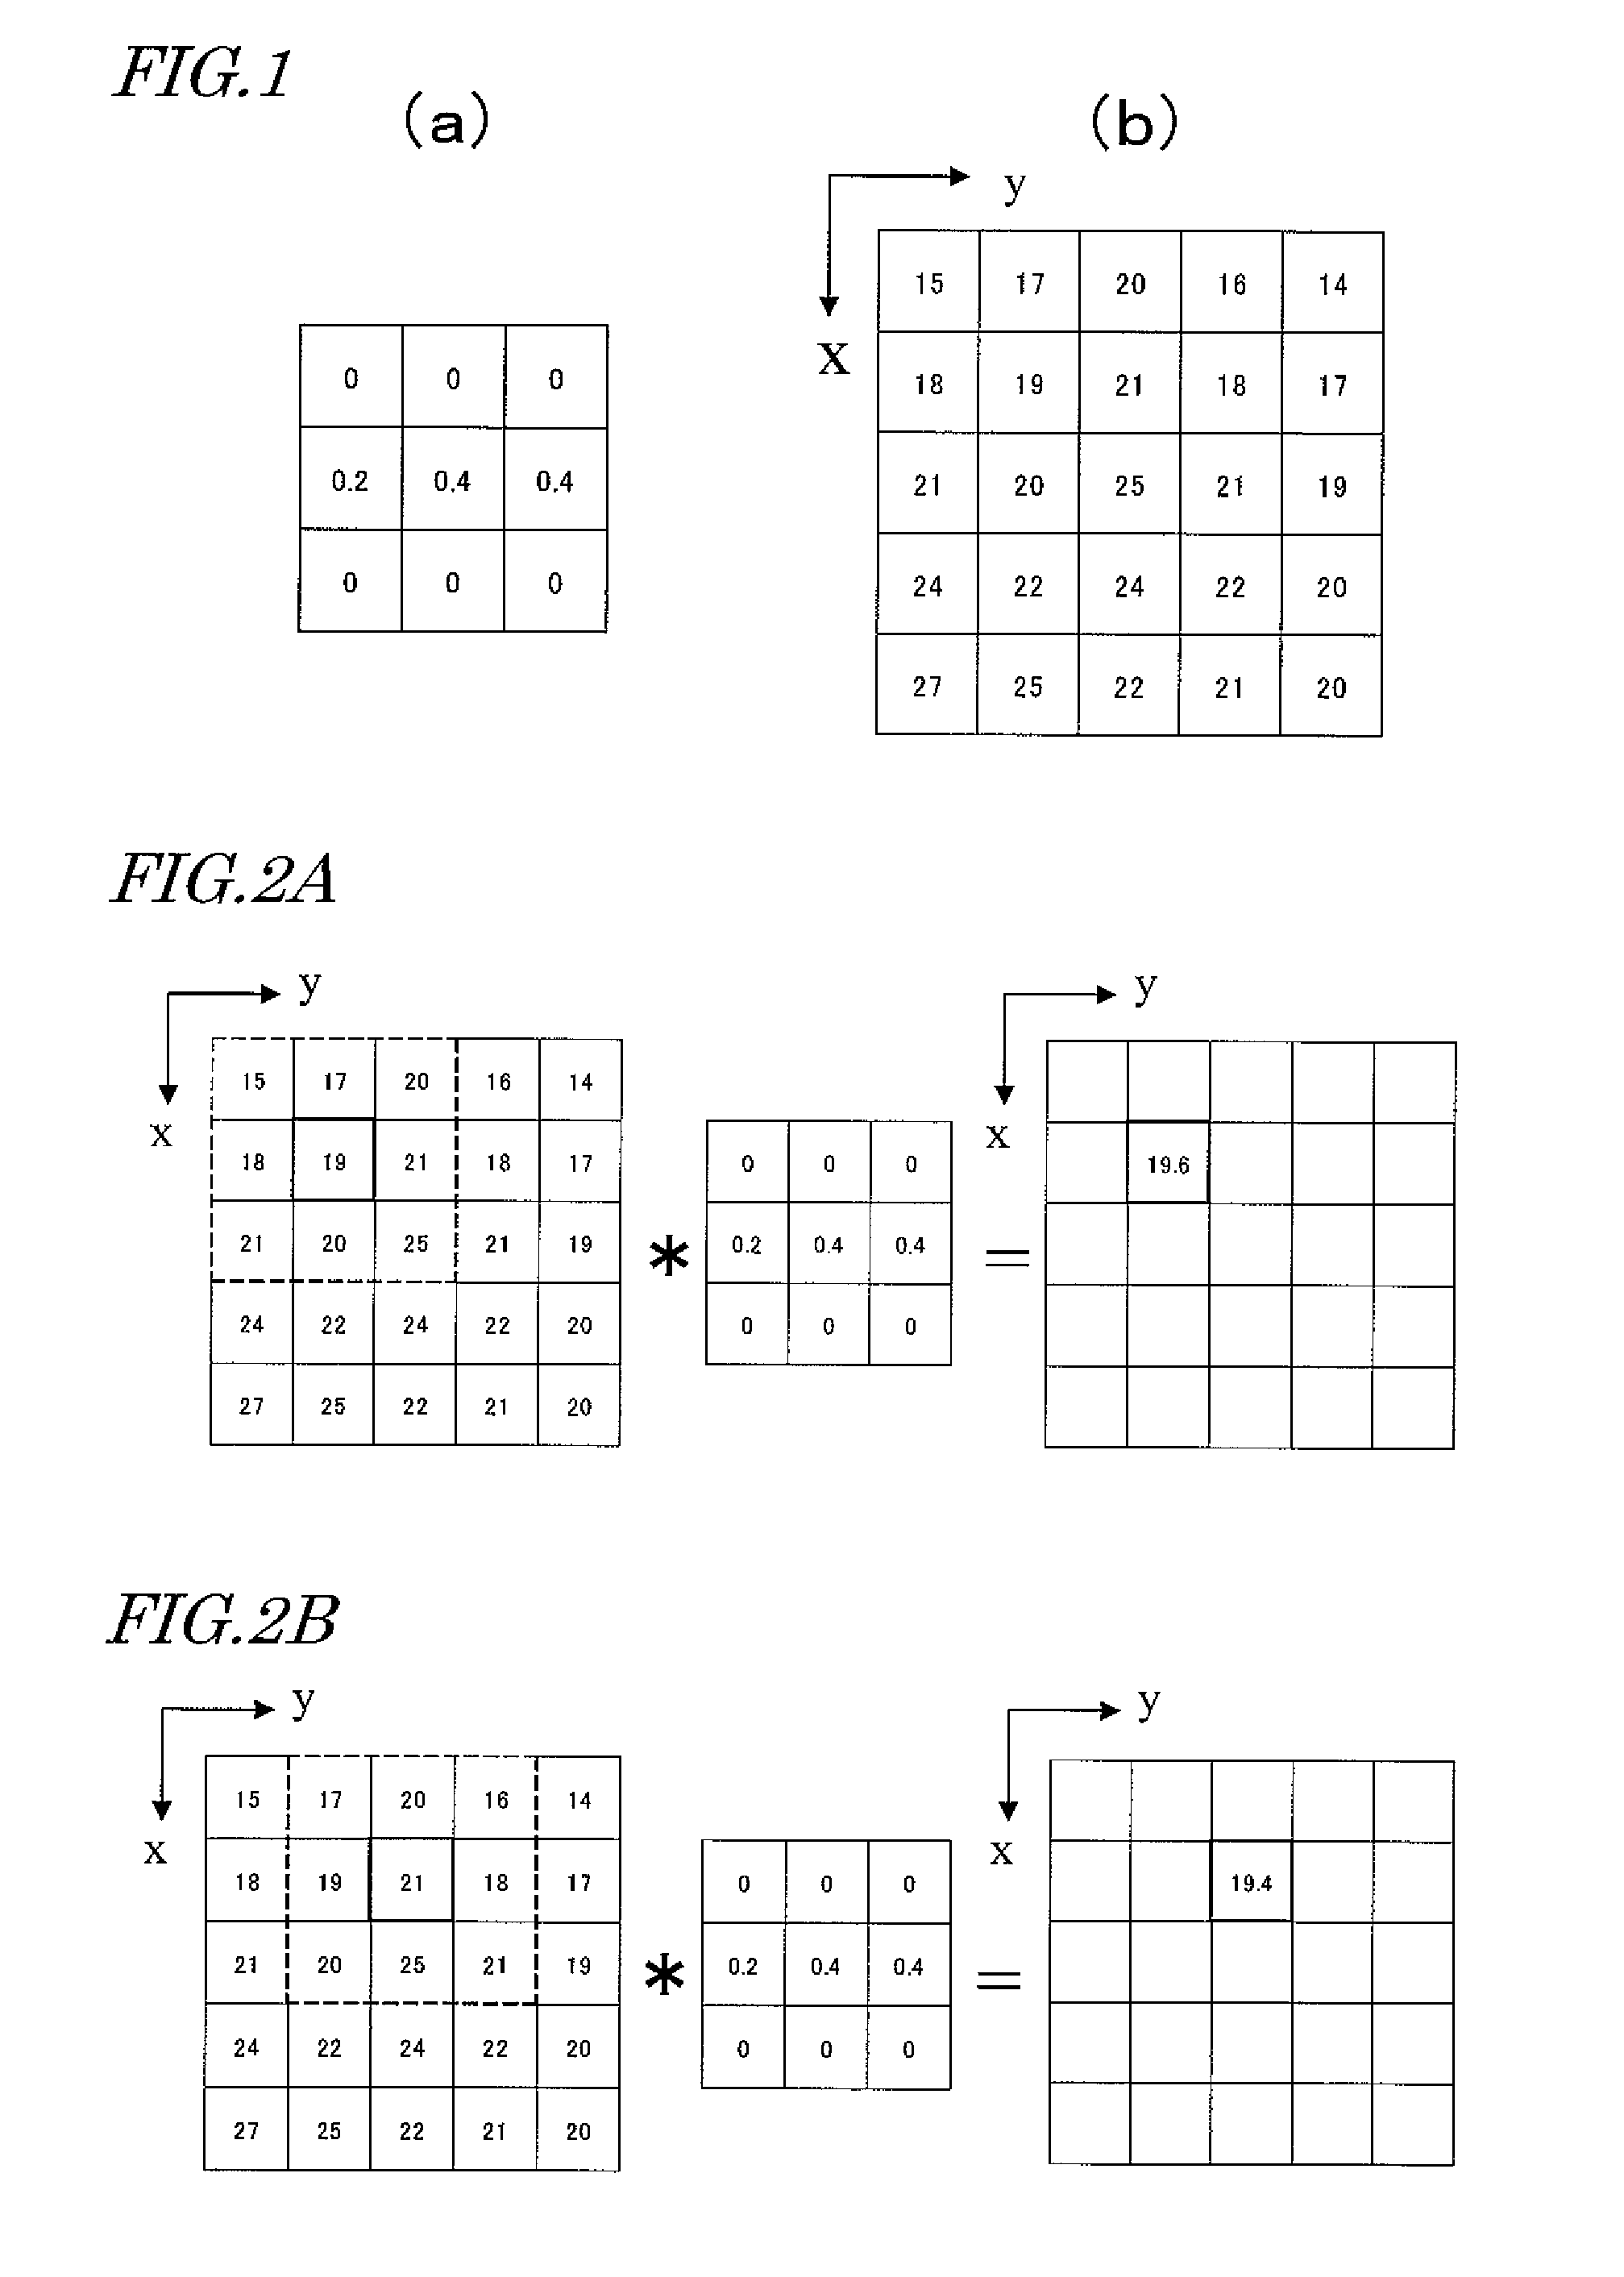 Reducing blur based on a kernel estimation of an imaging device